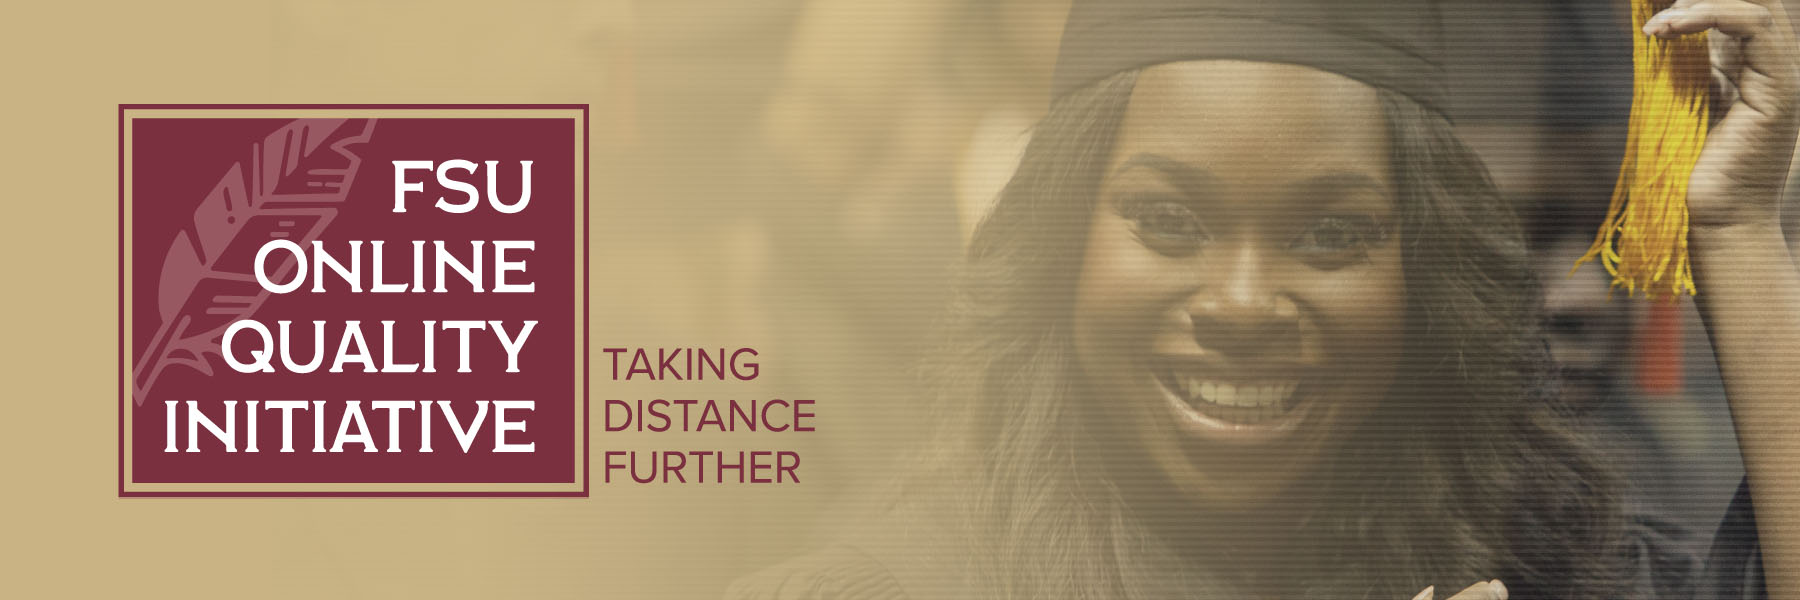 distance at fsu | Office of Distance Learning